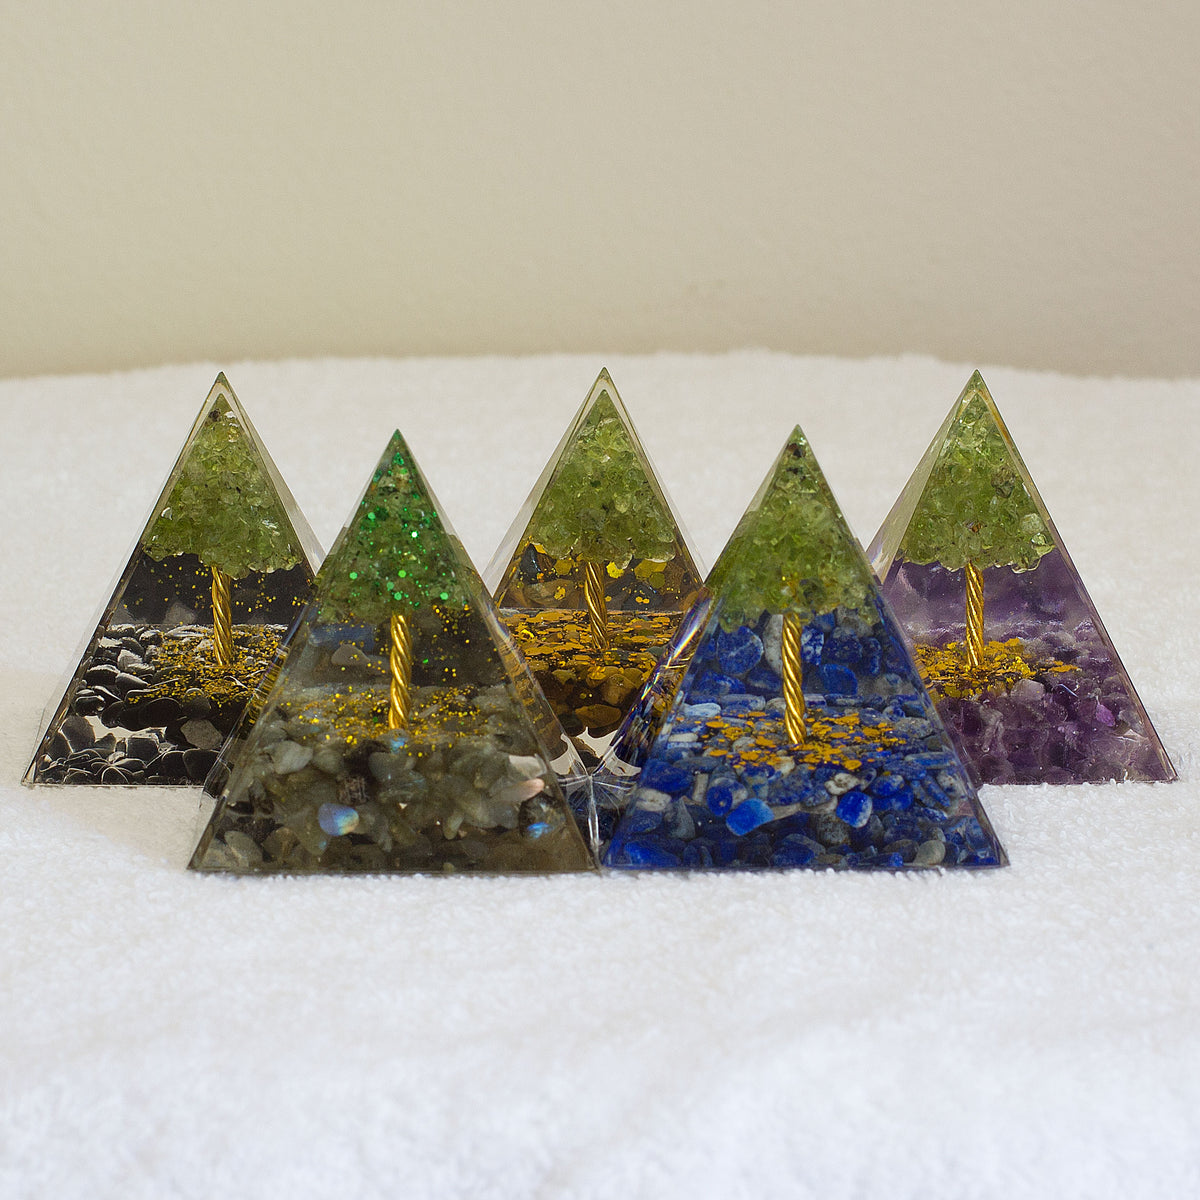 By tapping into the cosmic universal energy with a mix of quartz crystals, semi-precious gemstones, metals, and resin, you can balance out the life energy that surrounds you. Any negative vibes and energy that affect your body and mind can be removed by using an orgonite pyramid in your home. These healing crystals are made of metal shavings, resin, and gemstones, which balance electromagnetic fields and promote positive energy.